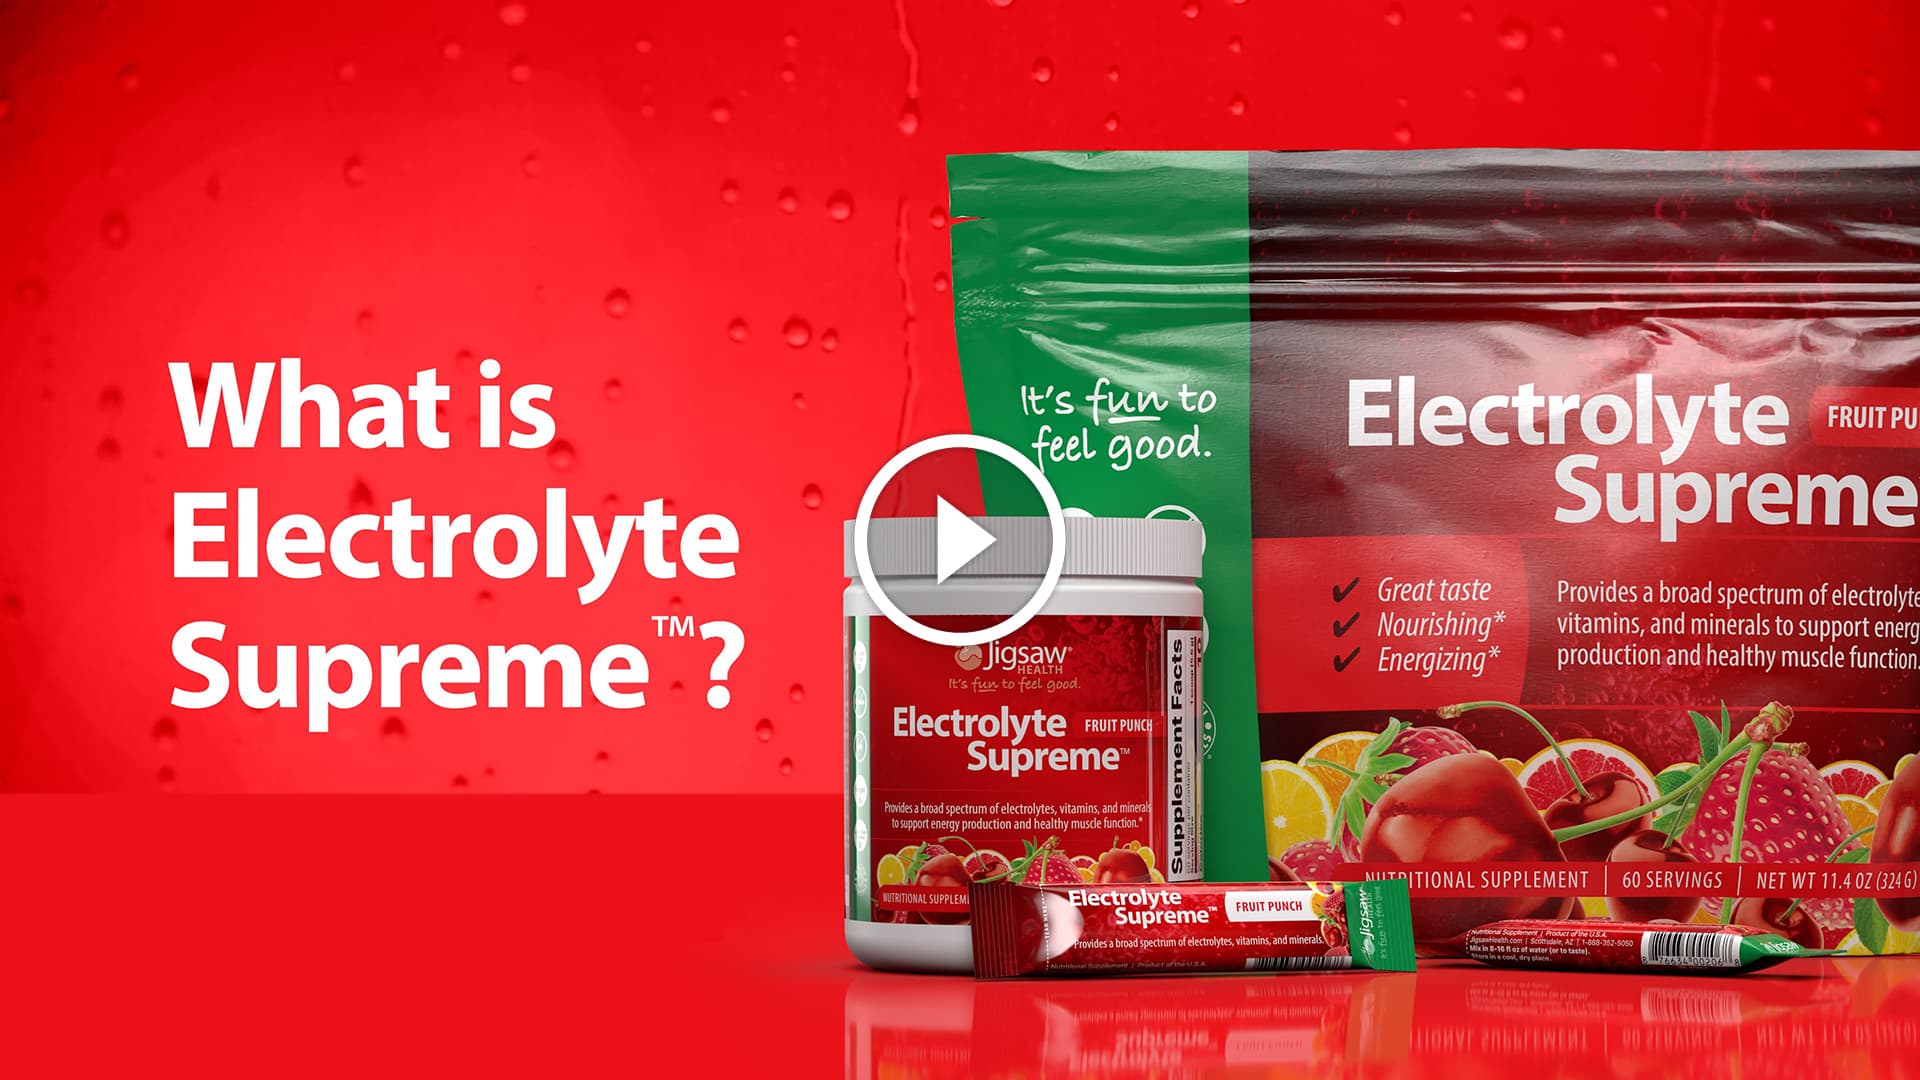 What is Electrolyte Supreme?